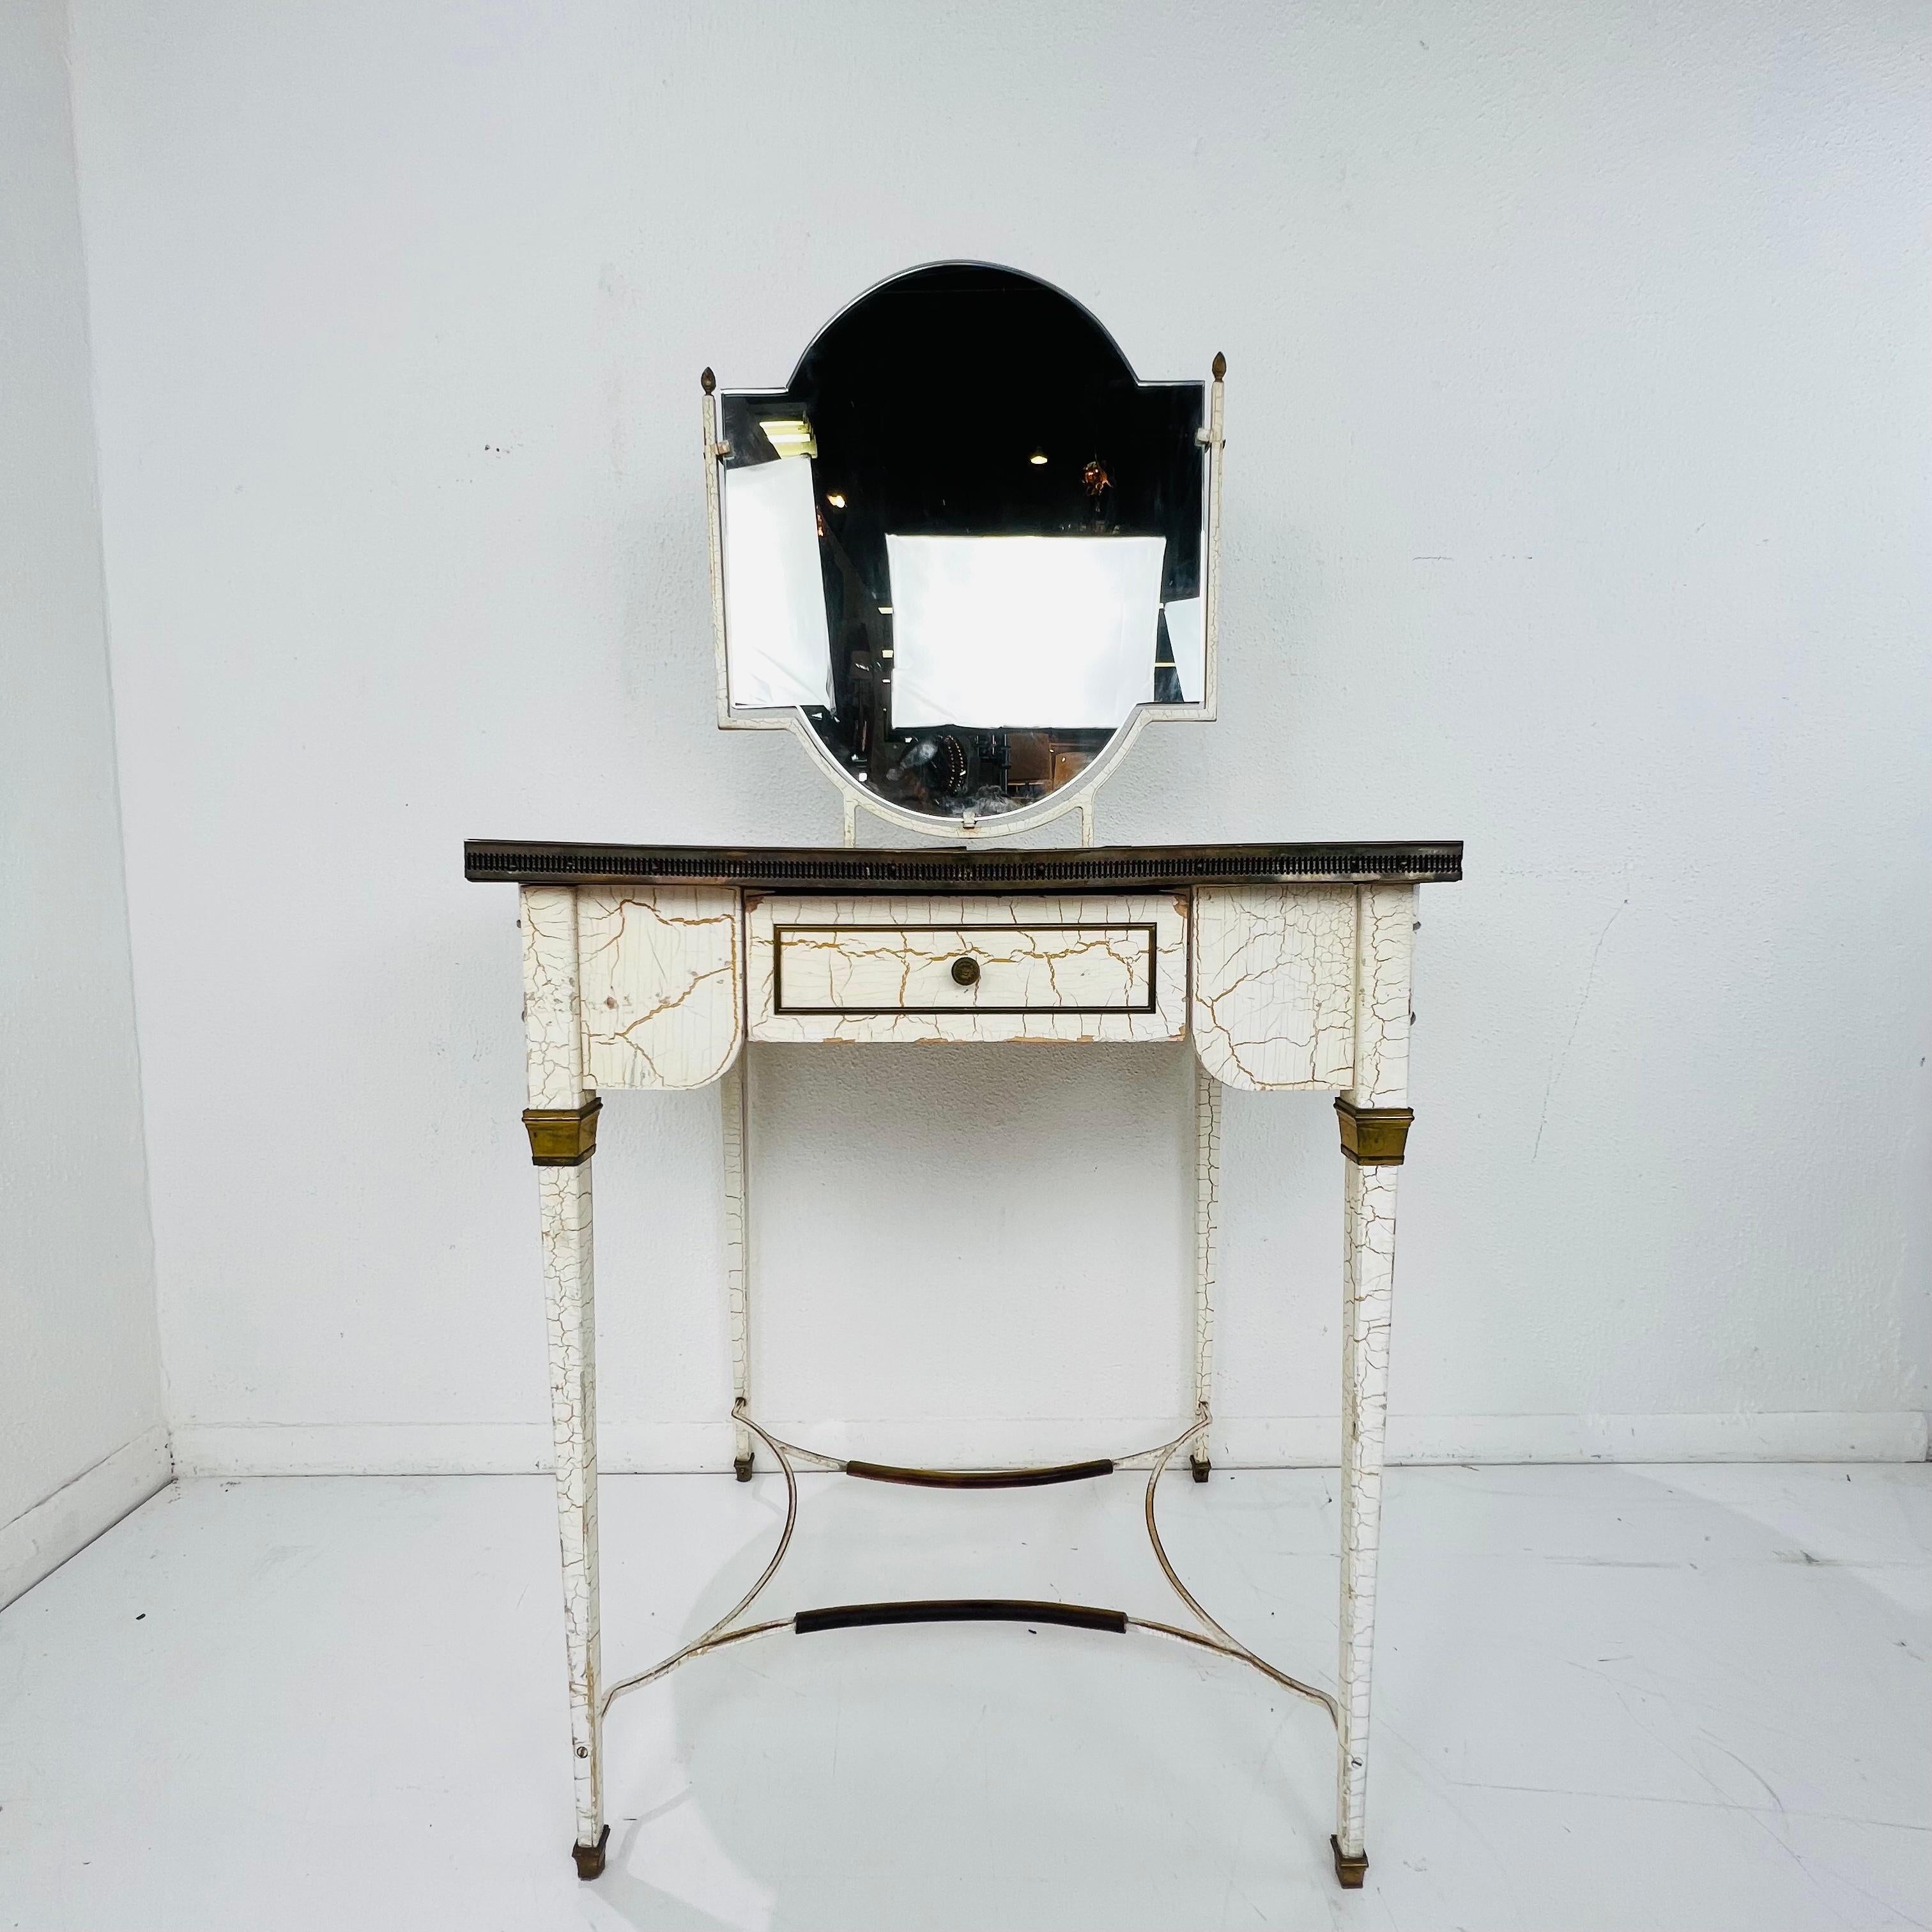 Stunning Louis XVI style dressing table/vanity. Featuring a double sided mirror and painted metal legs, this dressing table is a stunning addition to any bedroom, dressing room or bathroom. Top features French Provential scenery under antique